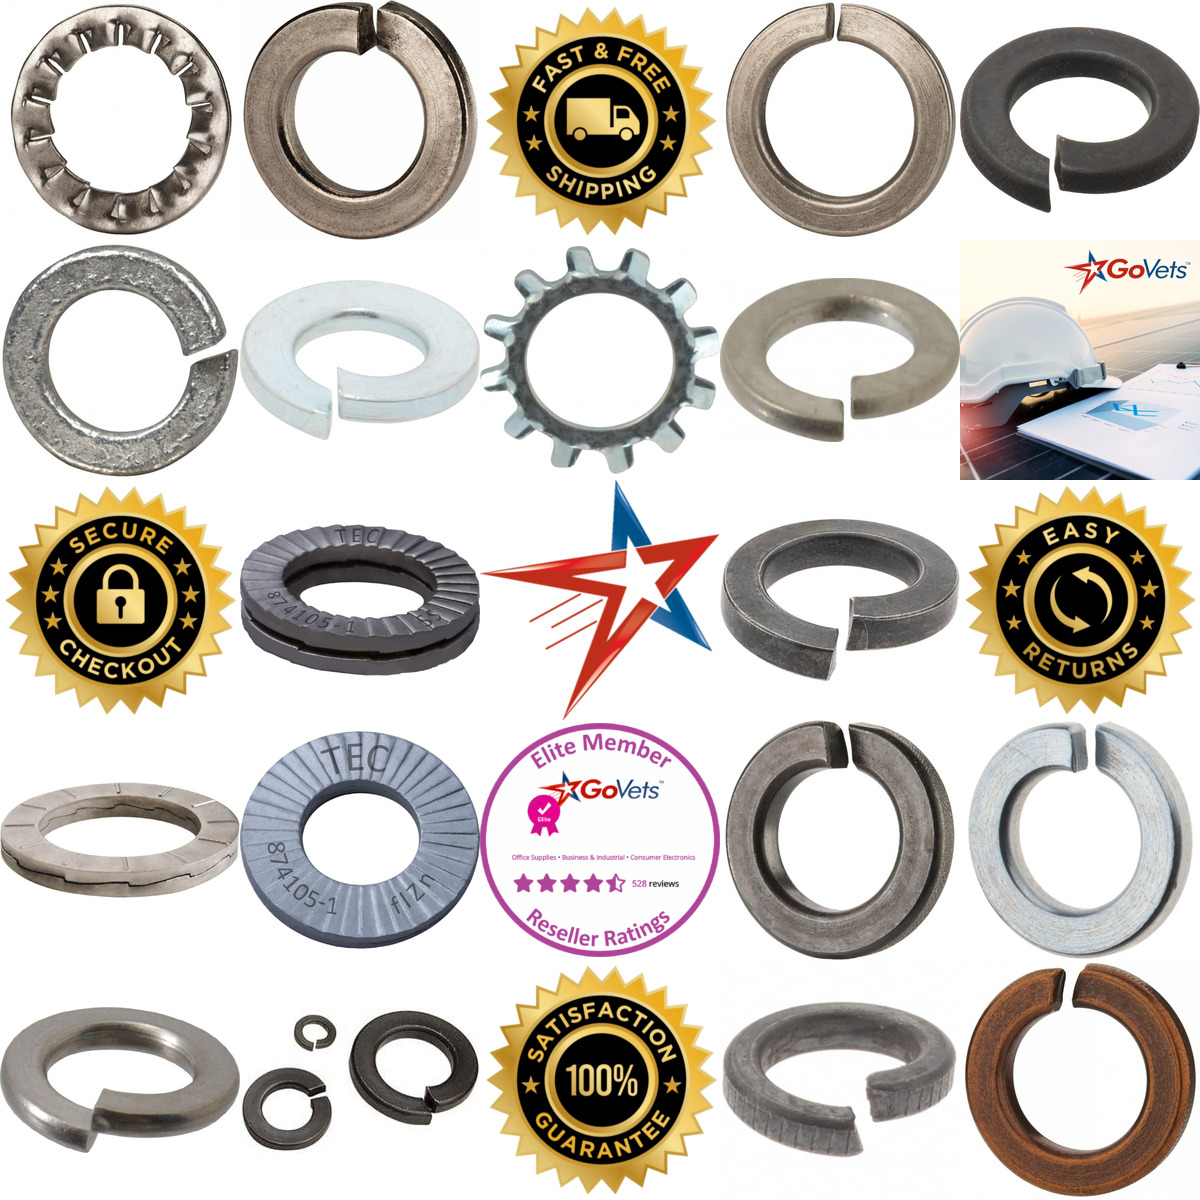 A selection of Lock Washers products on GoVets